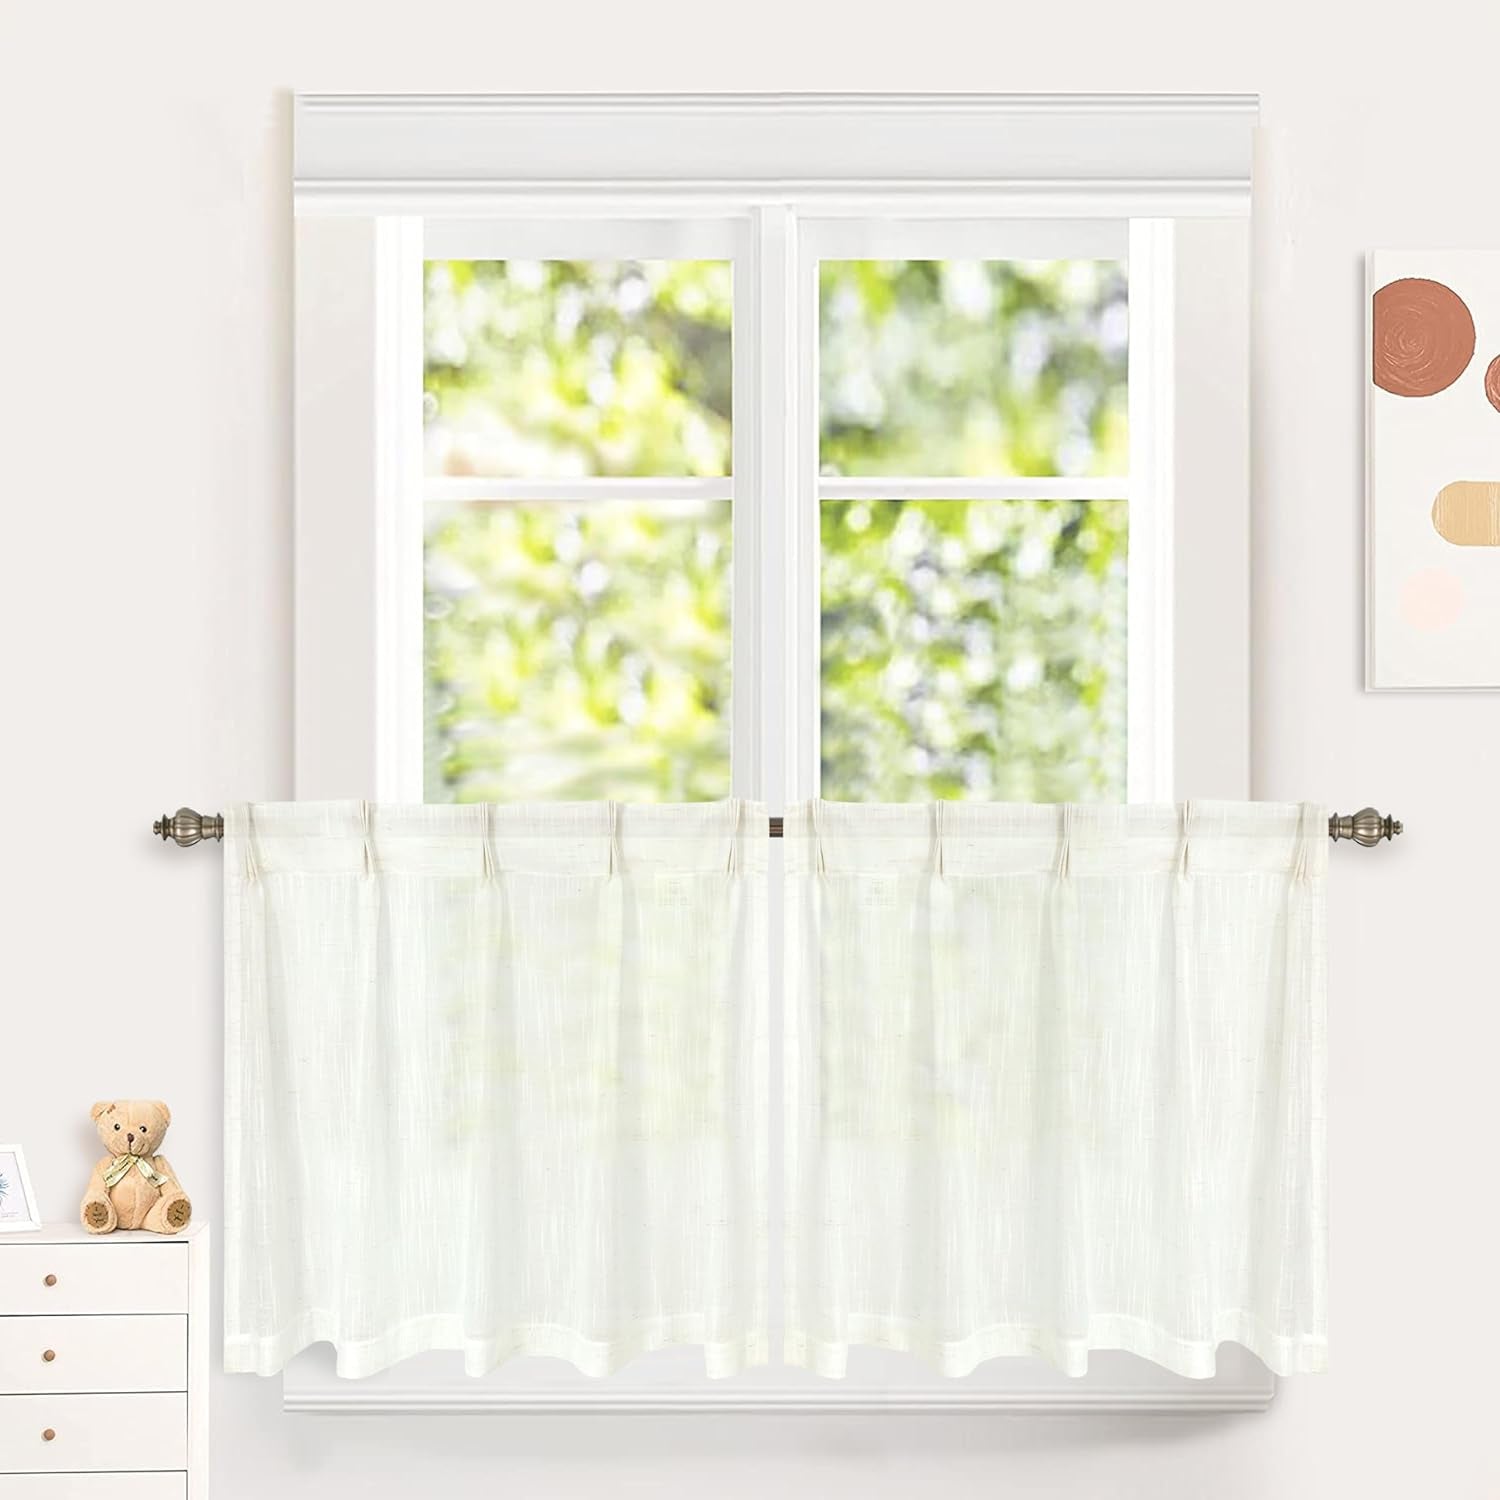 Driftaway Pinch Pleat Kitchen Curtains Linen Textured Short Linen Curtains for Bathroom Laundry Room Cafe Curtains Half Window Curtains 2 Panels Farmhouse Rustic Back Tabs 30 X 36 Inches Ivory Birch  DriftAway Ivory Birch 30"X24" 